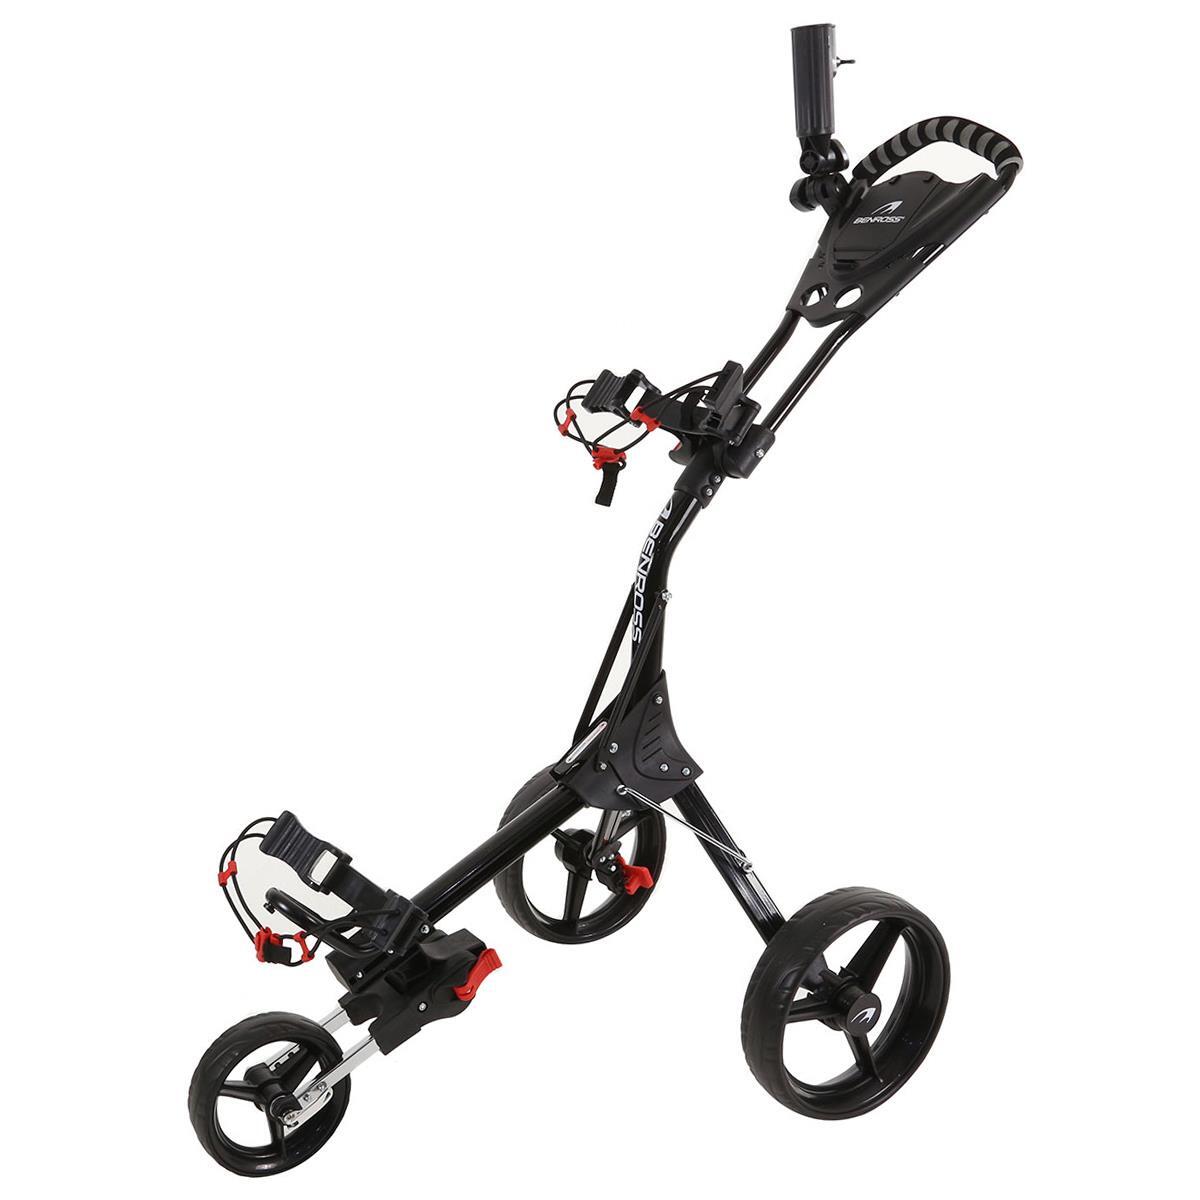 Benross Pro Compact Trolley UNISEX ONE SIZE BLACK 1/4